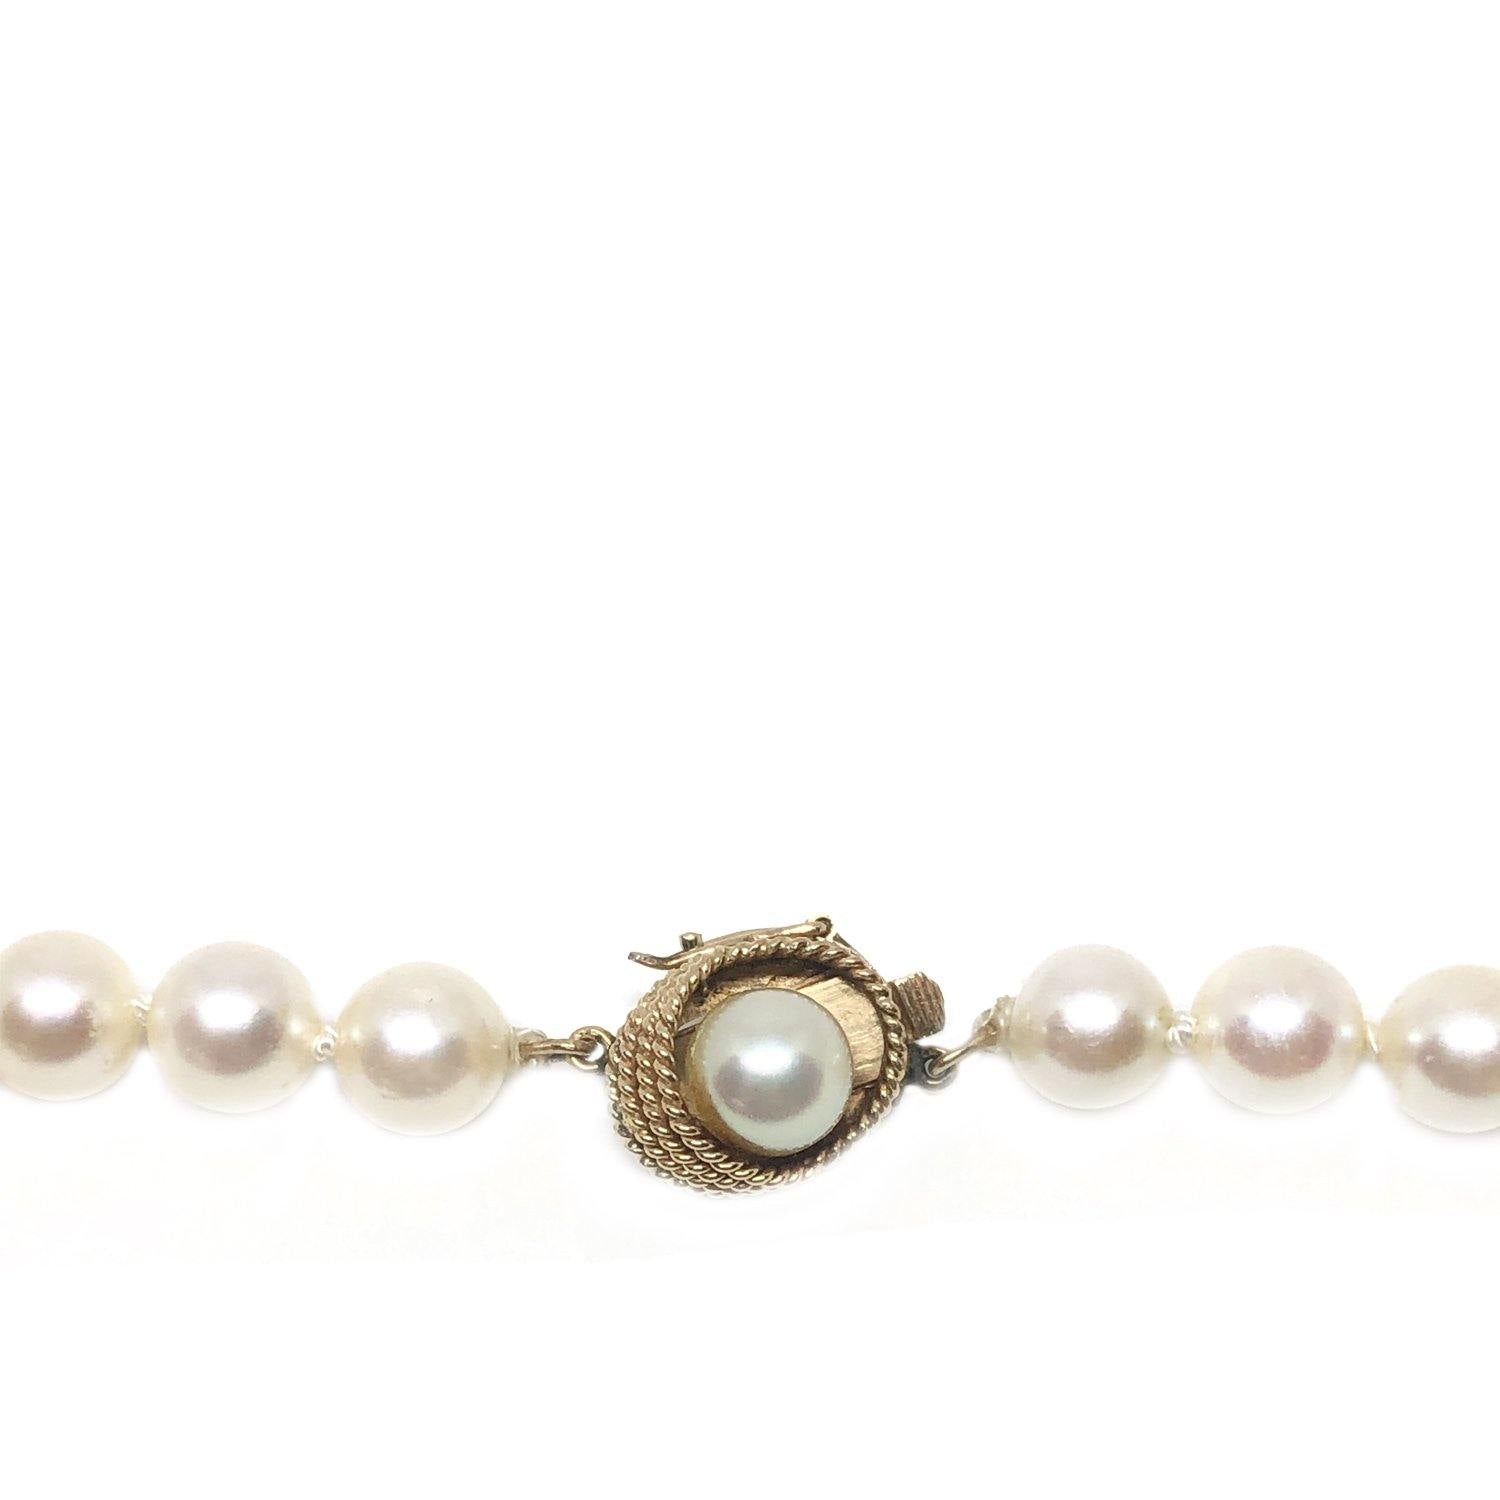 Braided Japanese Saltwater Cultured Akoya Pearl Strand - 14K Yellow Gold 31 Inch - Vintage Valuable Pearls